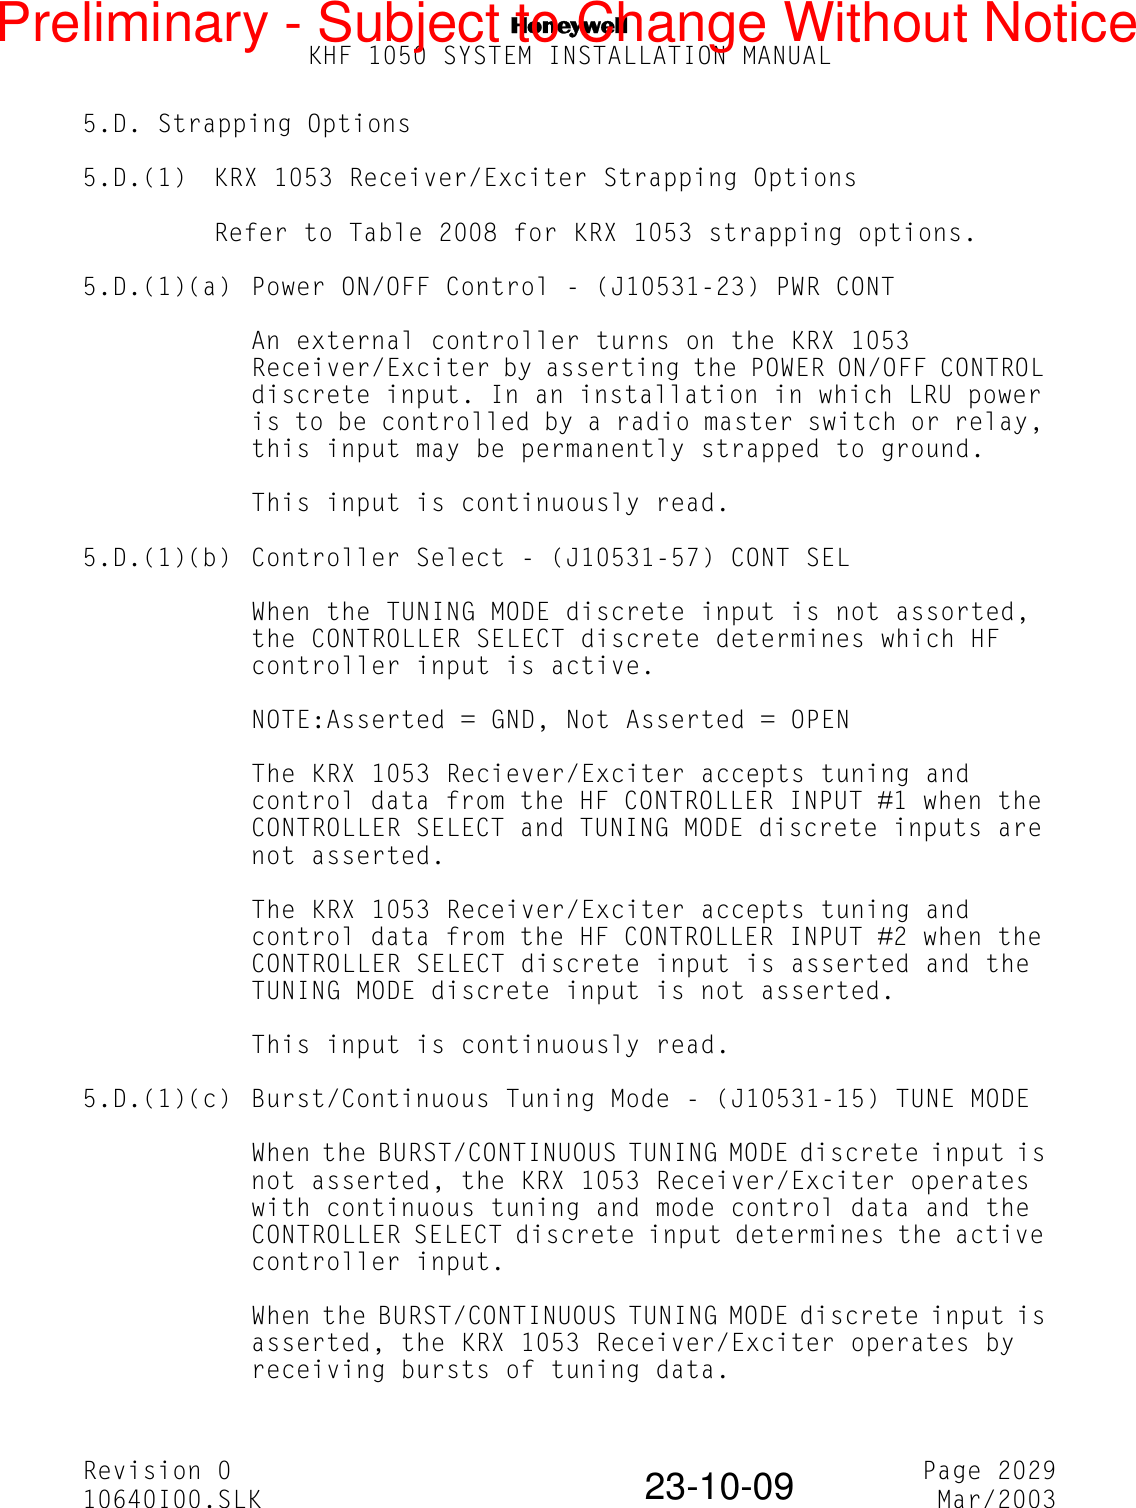 NKHF 1050 SYSTEM INSTALLATION MANUALRevision 0 Page 202910640I00.SLK Mar/200323-10-095.D. Strapping Options5.D.(1) KRX 1053 Receiver/Exciter Strapping OptionsRefer to Table 2008 for KRX 1053 strapping options.5.D.(1)(a) Power ON/OFF Control - (J10531-23) PWR CONTAn external controller turns on the KRX 1053 Receiver/Exciter by asserting the POWER ON/OFF CONTROL discrete input. In an installation in which LRU power is to be controlled by a radio master switch or relay, this input may be permanently strapped to ground.This input is continuously read.5.D.(1)(b) Controller Select - (J10531-57) CONT SELWhen the TUNING MODE discrete input is not assorted, the CONTROLLER SELECT discrete determines which HF controller input is active.NOTE:Asserted = GND, Not Asserted = OPENThe KRX 1053 Reciever/Exciter accepts tuning and control data from the HF CONTROLLER INPUT #1 when the CONTROLLER SELECT and TUNING MODE discrete inputs are not asserted.The KRX 1053 Receiver/Exciter accepts tuning and control data from the HF CONTROLLER INPUT #2 when the CONTROLLER SELECT discrete input is asserted and the TUNING MODE discrete input is not asserted.This input is continuously read.5.D.(1)(c) Burst/Continuous Tuning Mode - (J10531-15) TUNE MODEWhen the BURST/CONTINUOUS TUNING MODE discrete input is not asserted, the KRX 1053 Receiver/Exciter operates with continuous tuning and mode control data and the CONTROLLER SELECT discrete input determines the active controller input.When the BURST/CONTINUOUS TUNING MODE discrete input is asserted, the KRX 1053 Receiver/Exciter operates by receiving bursts of tuning data.Preliminary - Subject to Change Without Notice